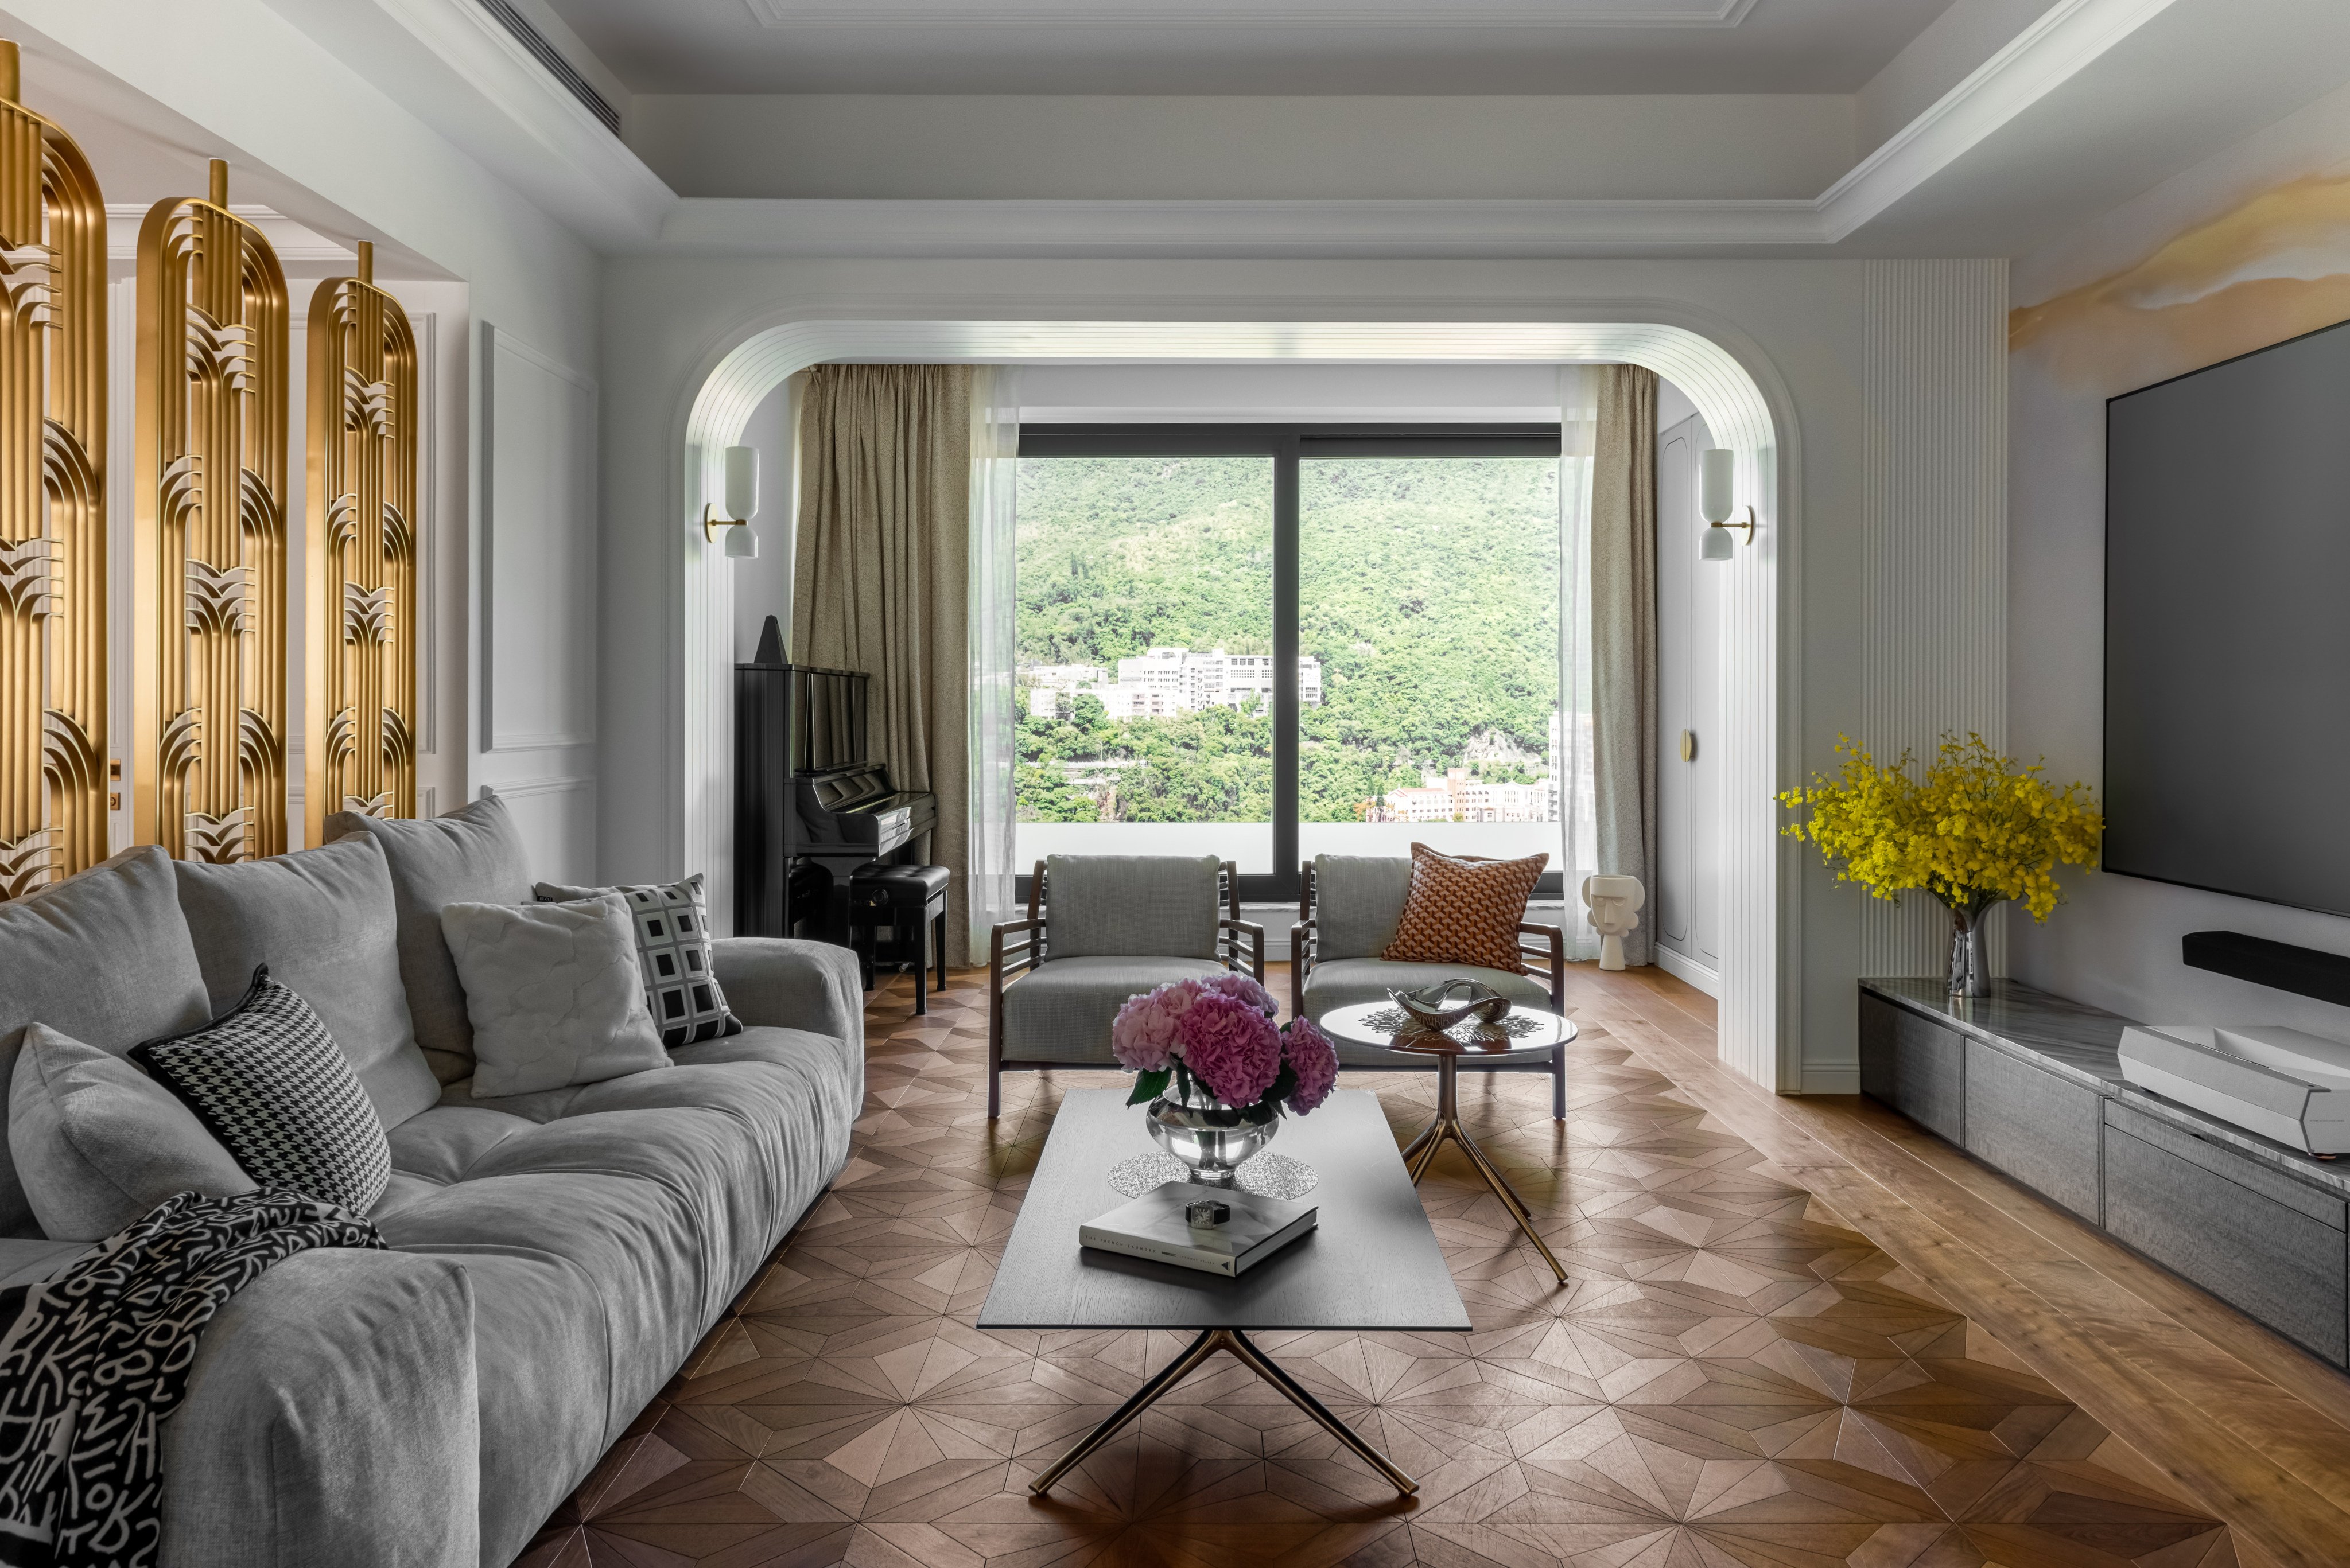 Art deco design was the name of the game when it came to jazzing up a Hong Kong family’s 2,500 sq ft flat. Photo: hoo